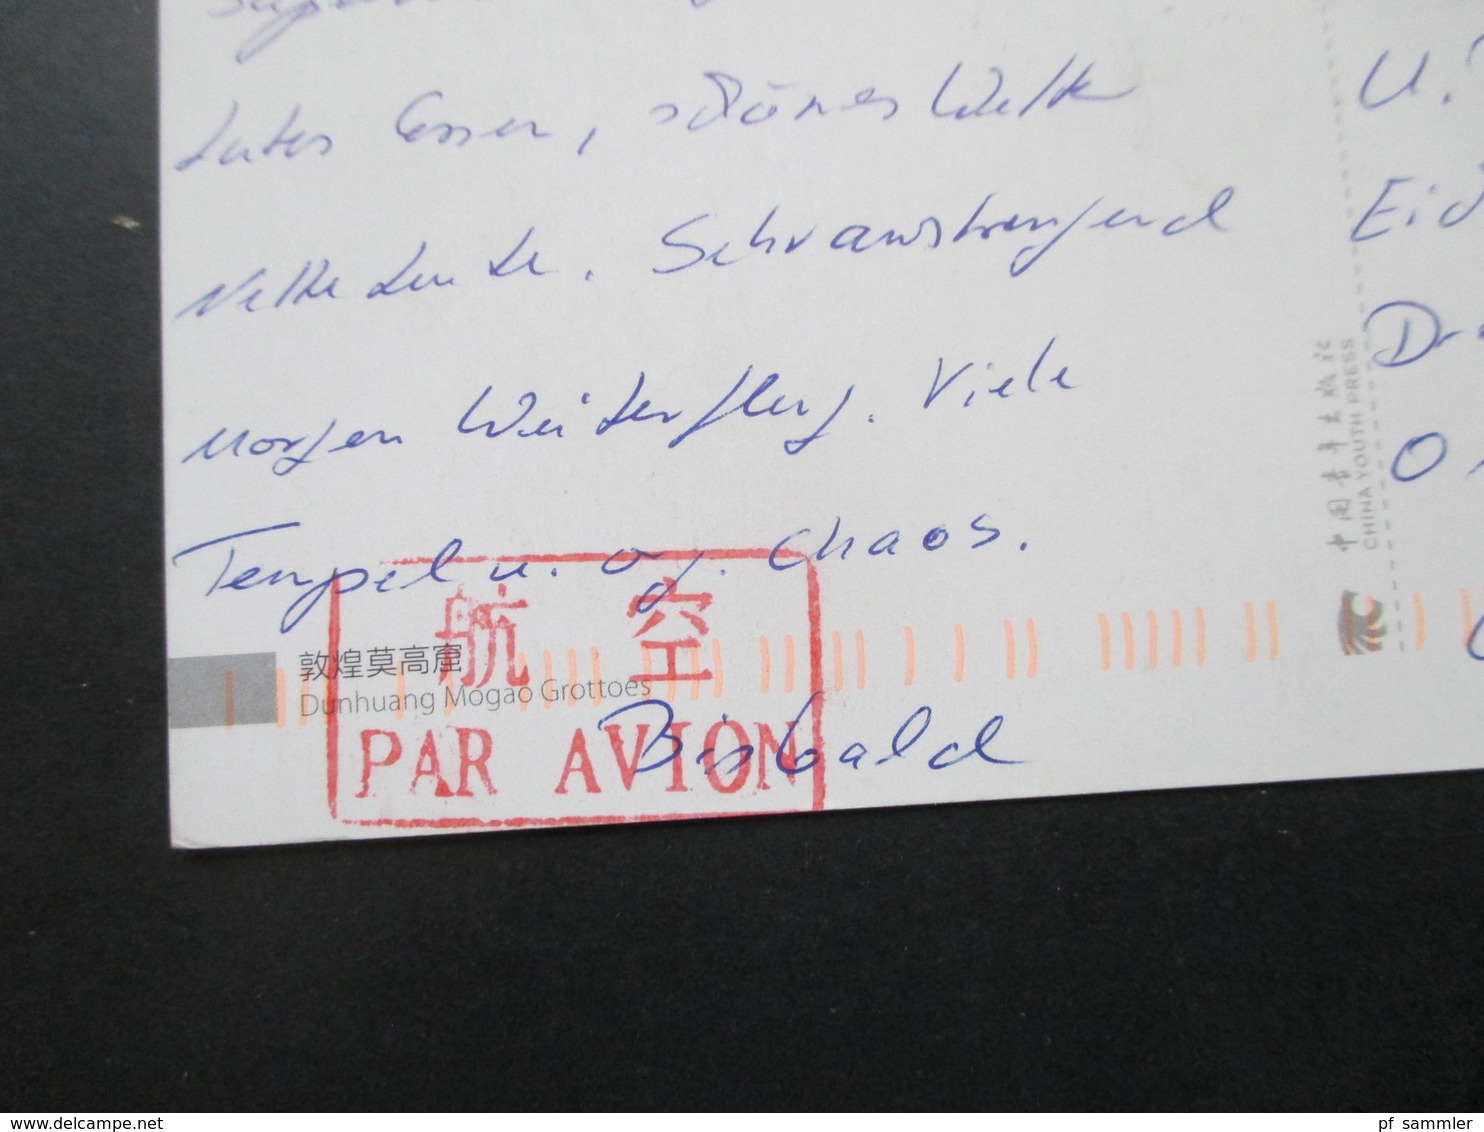 China 1998 / 2011 Postkarte / Luftpost Stempel In Rot! Dunhuang Magao Grottoes Mit 2 Marken Frankiert! - Storia Postale